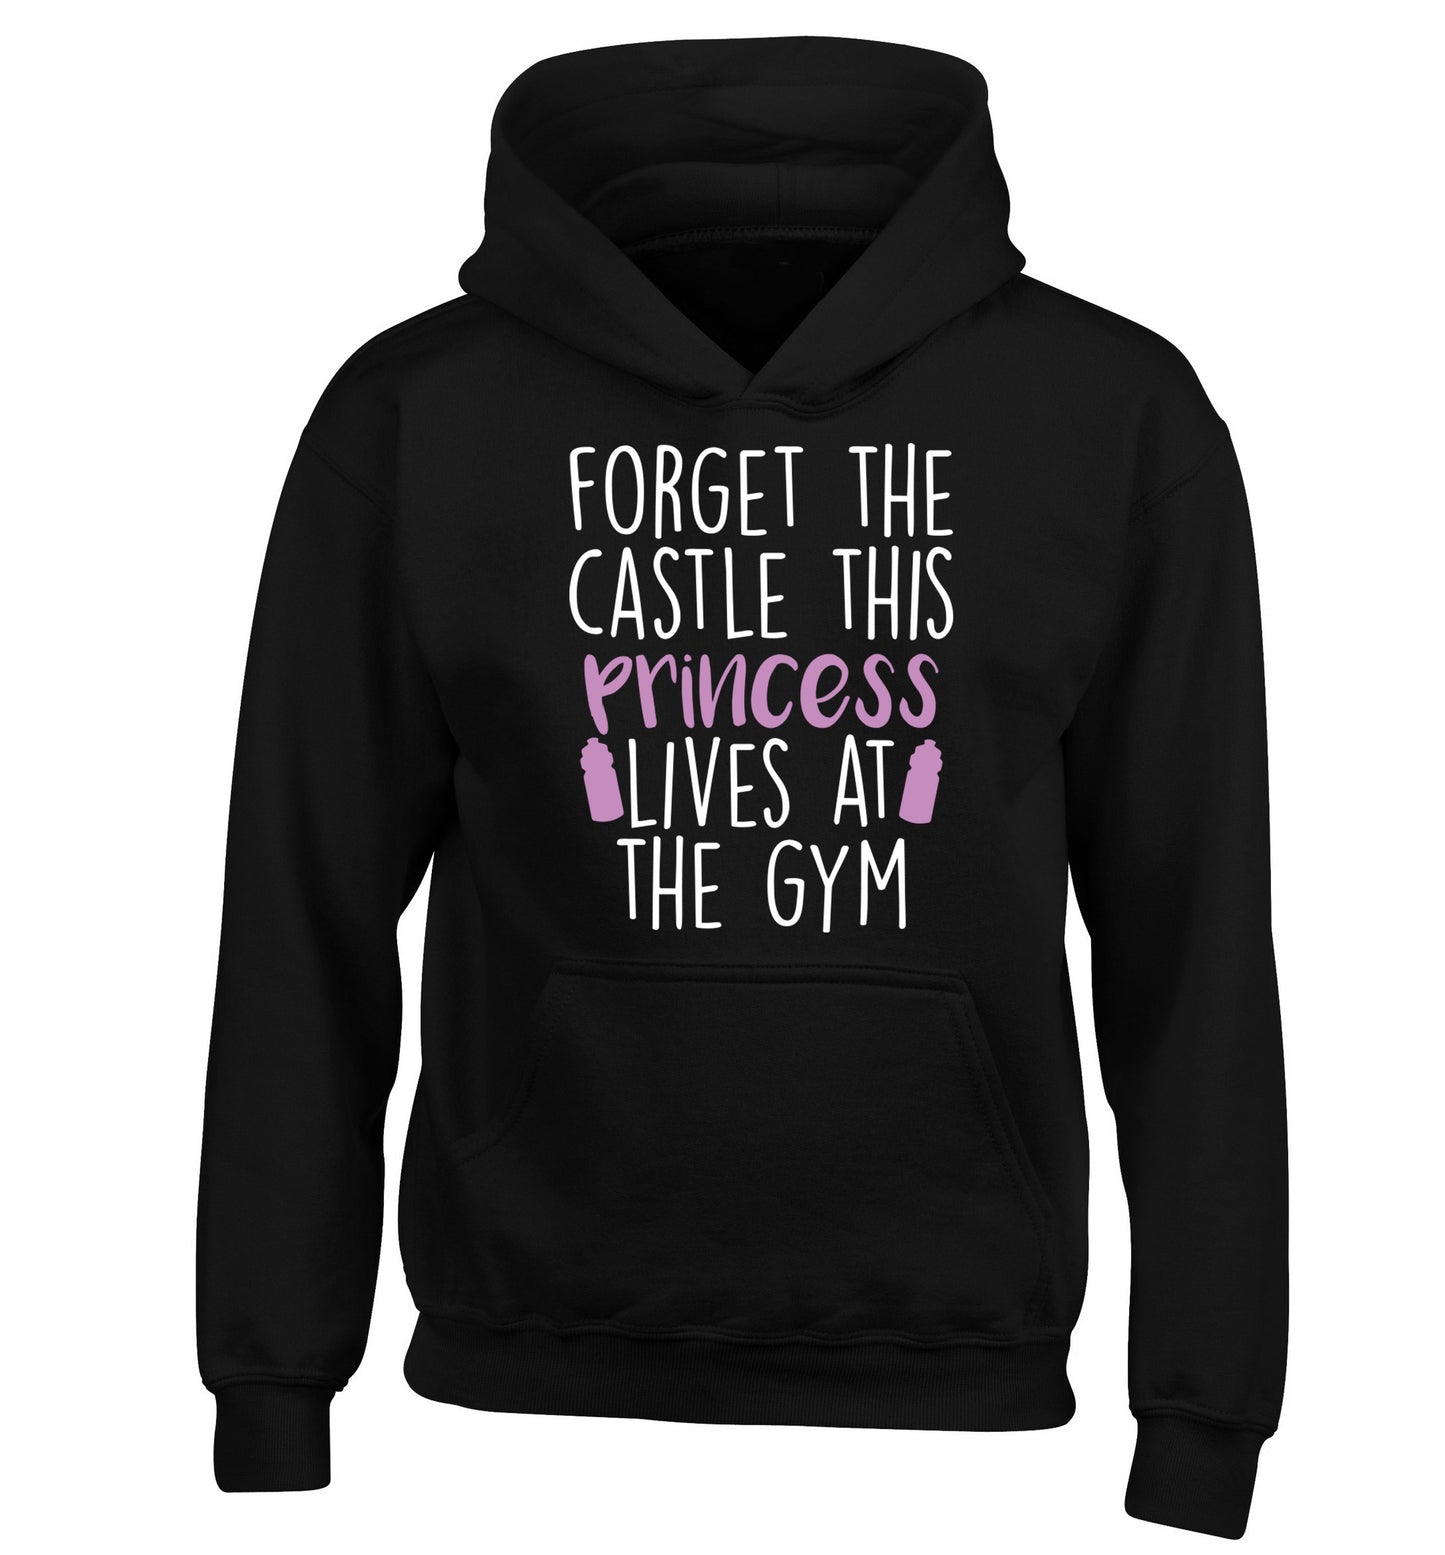 Forget the castle this princess lives at the gym children's black hoodie 12-14 Years